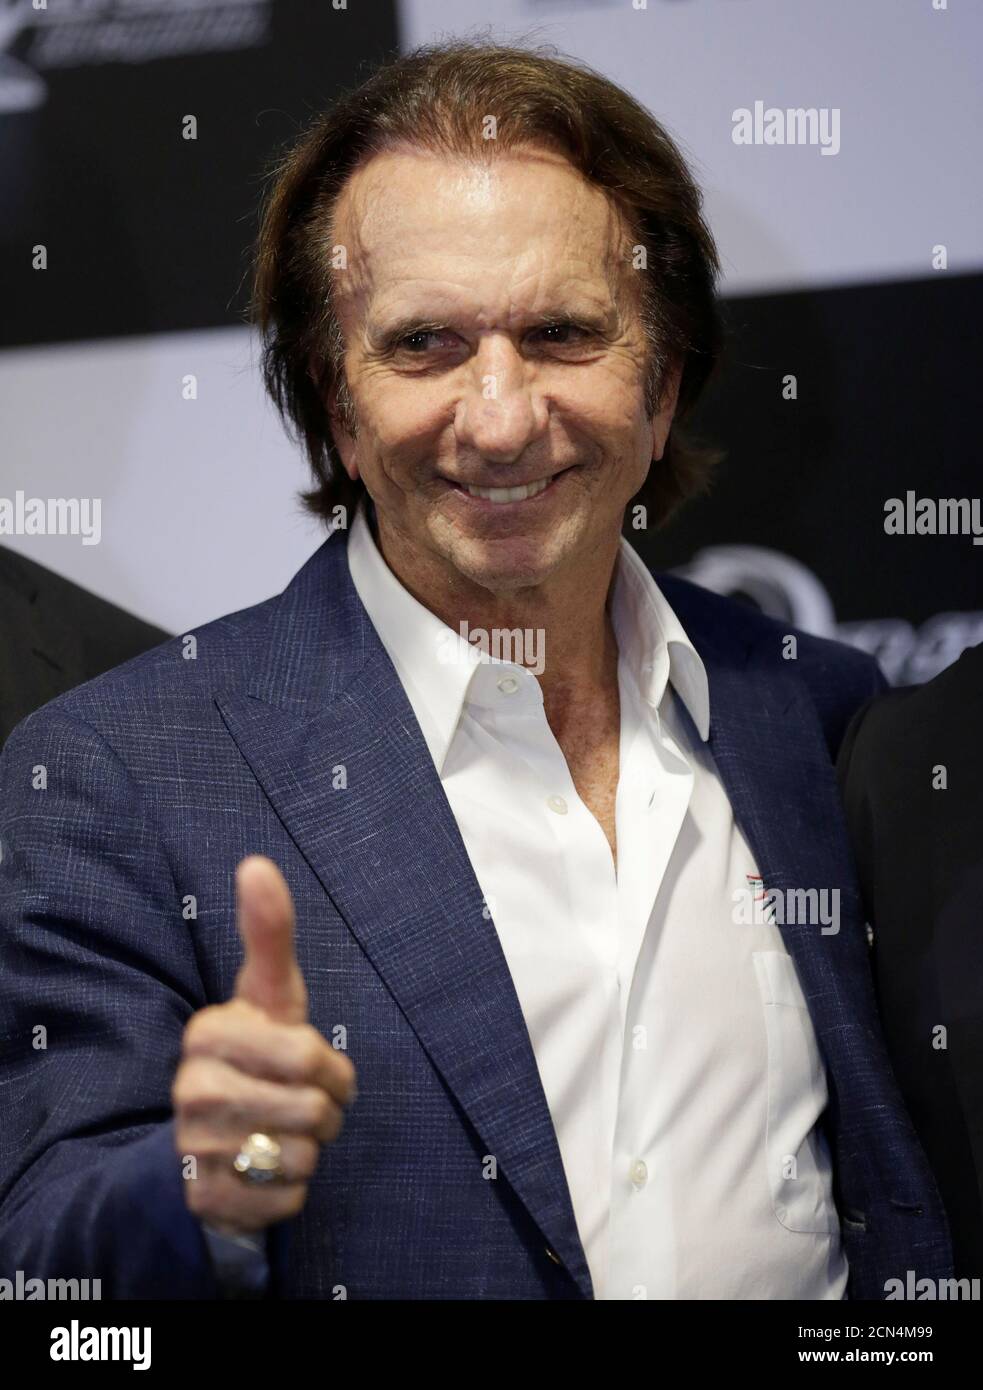 Former Brazilian Formula One driver Emerson Fittipaldi poses during a news conference about F1- FanZone in Mexico City, Mexico September 27, 2016. REUTERS/Henry Romero Stock Photo